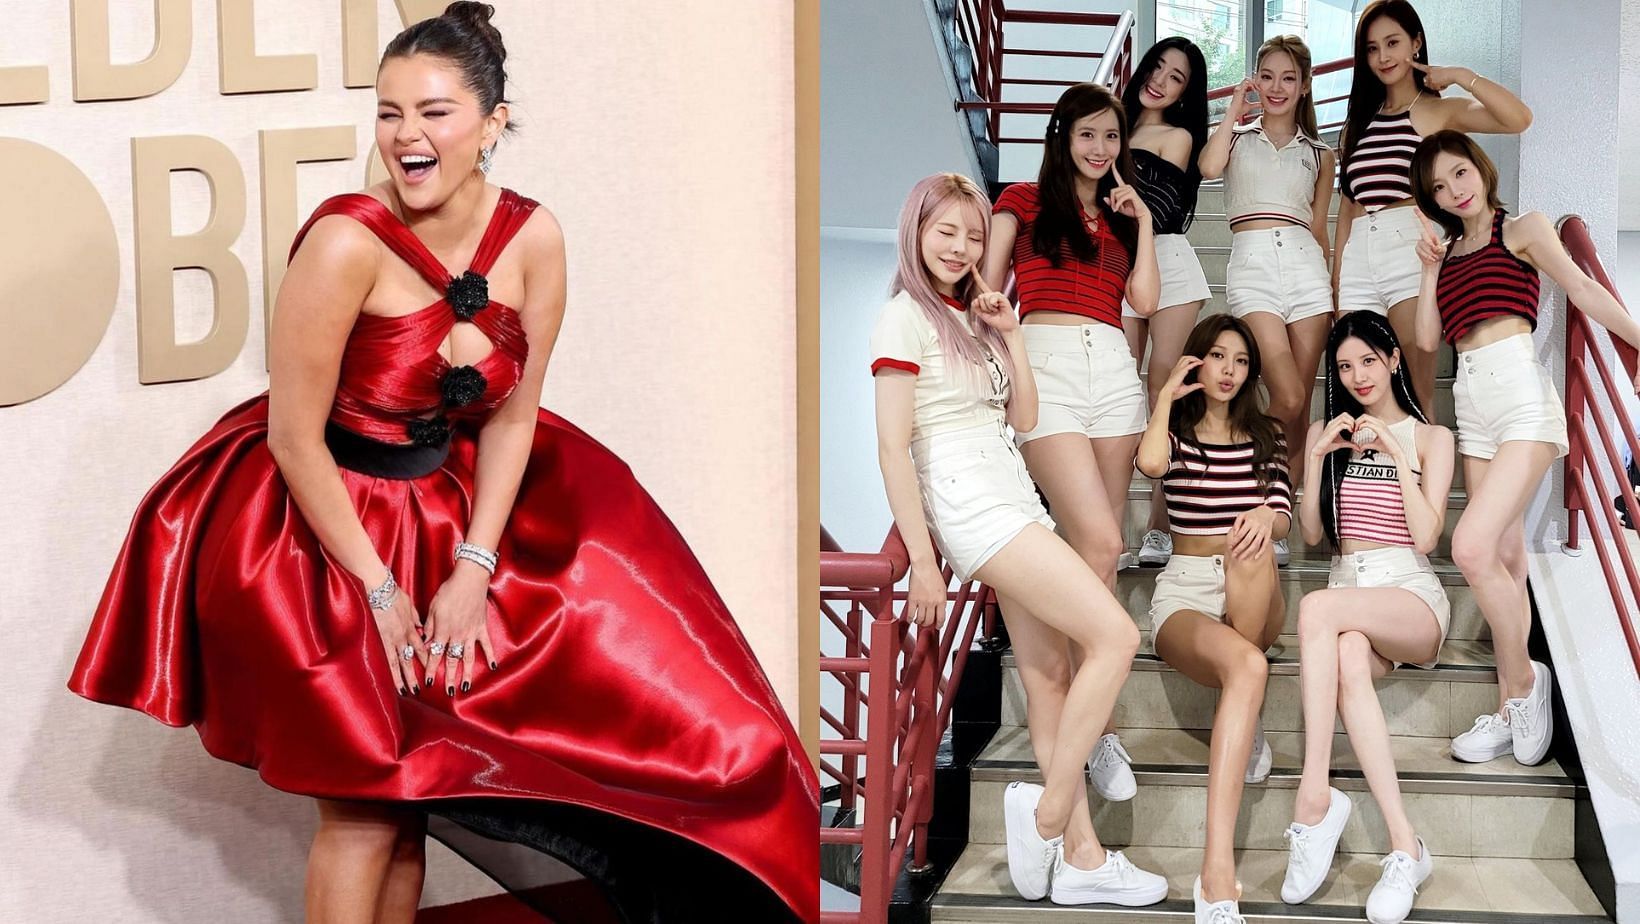 Selena Gomez accidentally uses montages of Girls